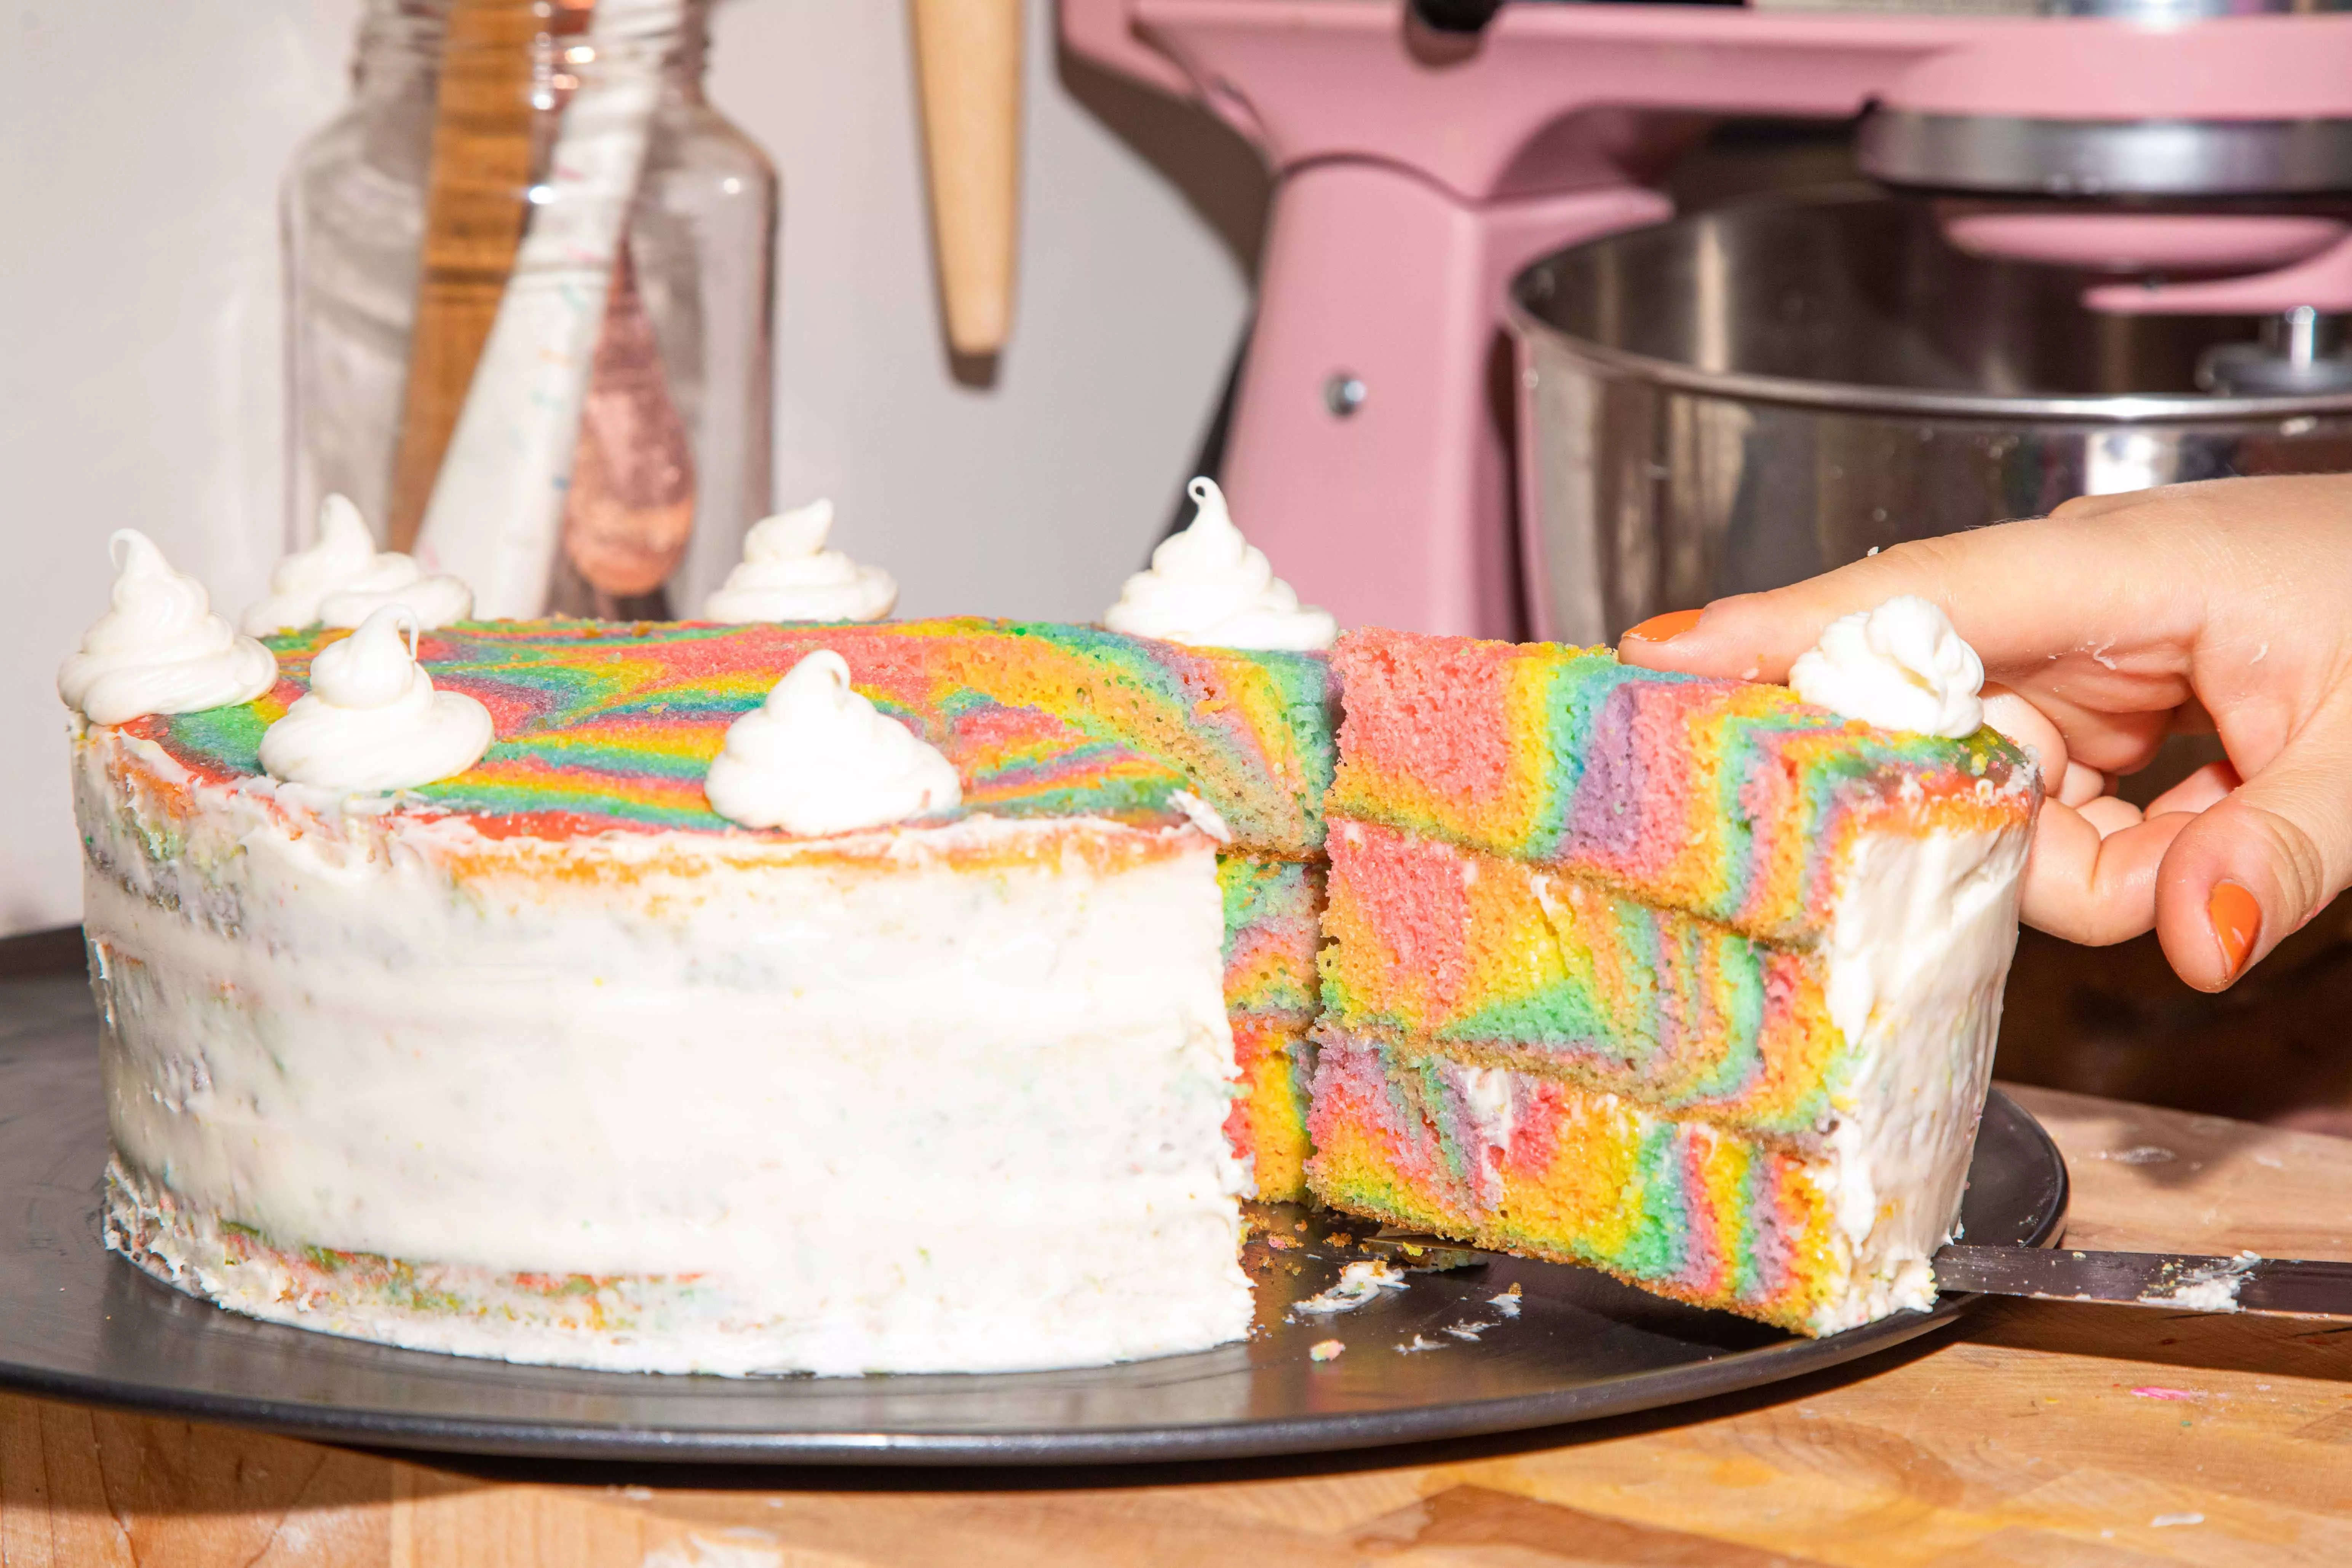 A slice of tie-dye patterned rainbow cake being cut out of a whole cake